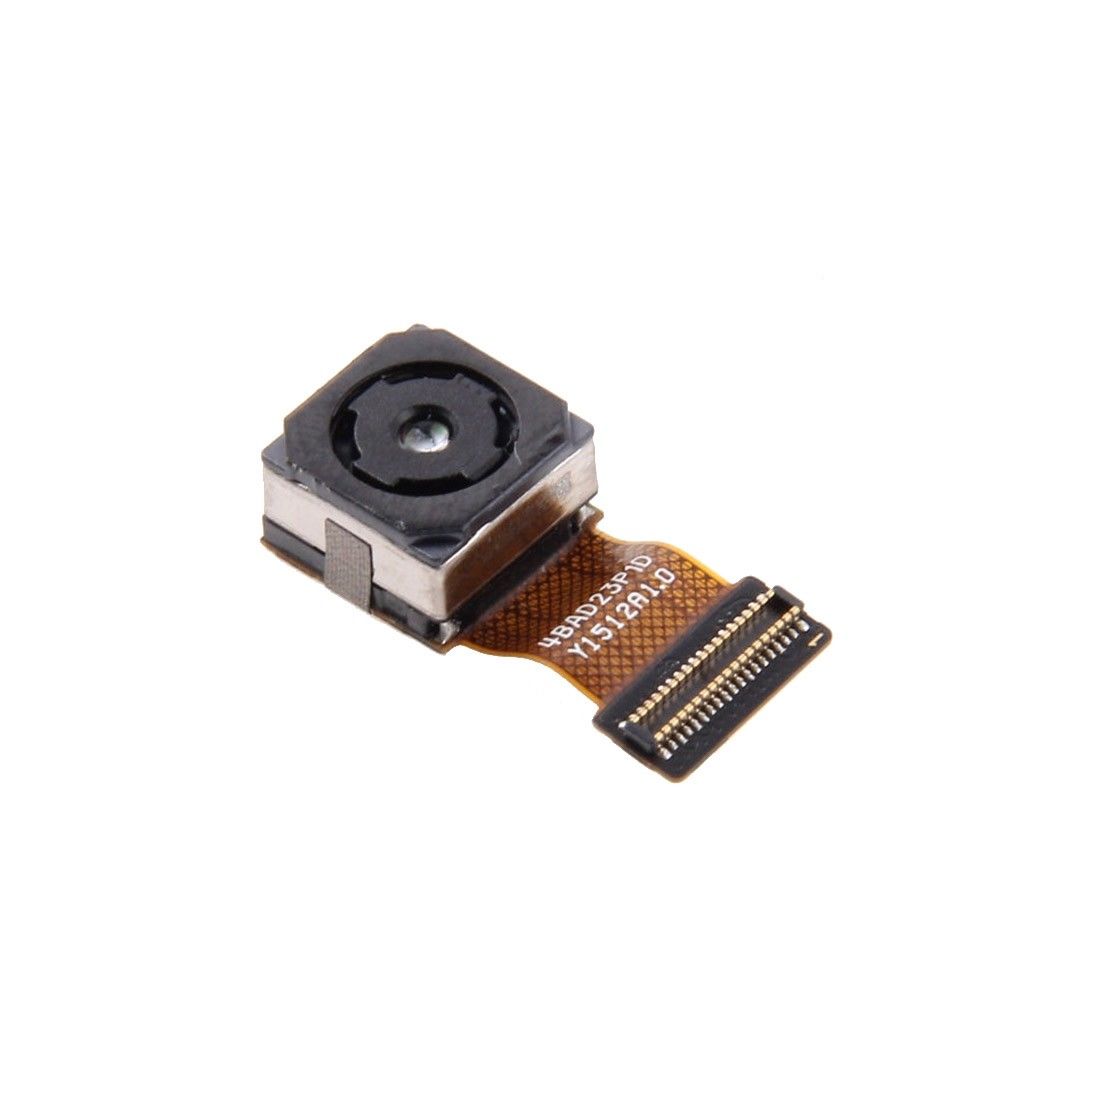 Huawei P8 Lite Genuine Rear Main Camera Module for [product_price] - First Help Tech